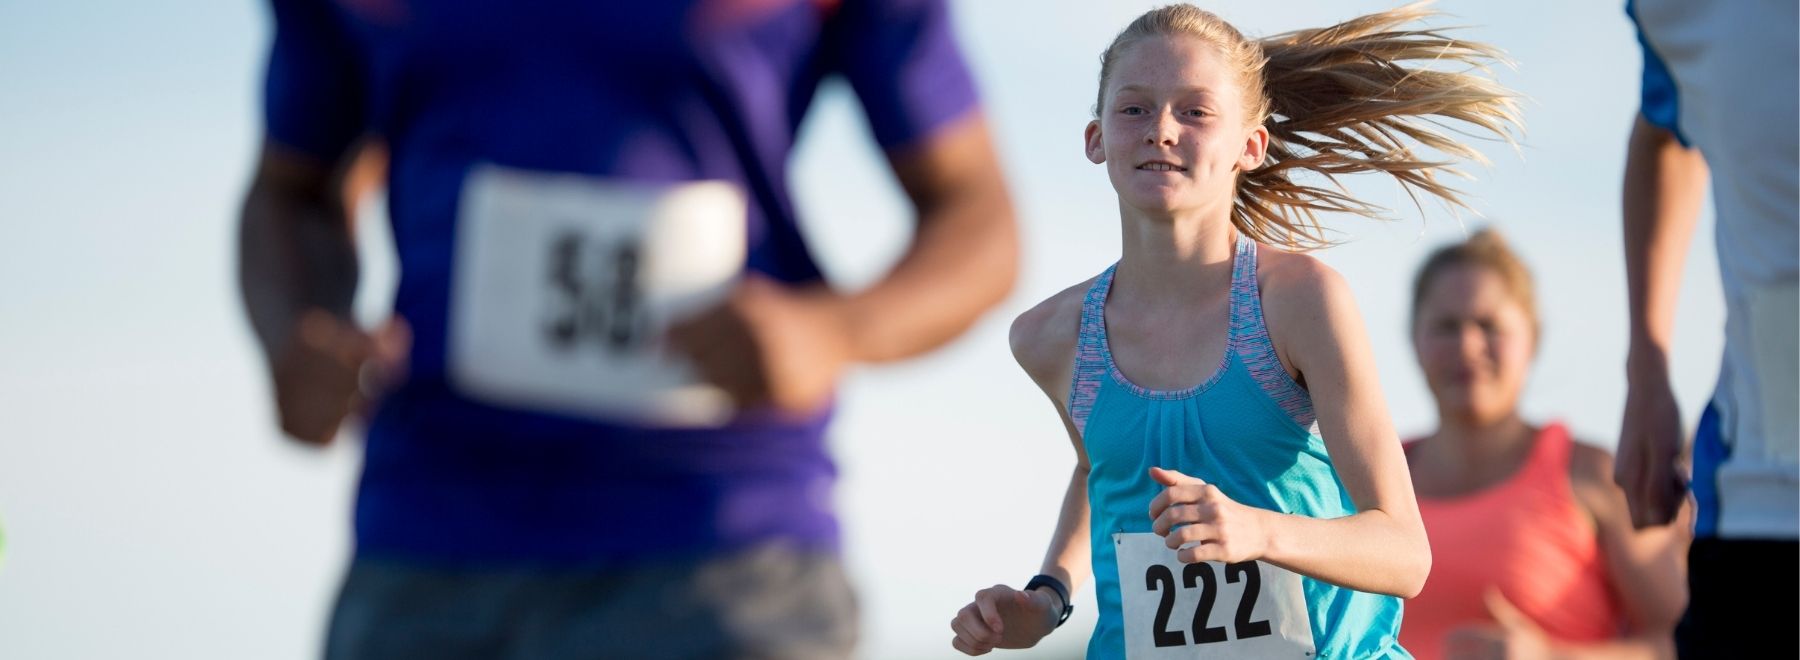 Young girl smiling while running 5K marathon with adults